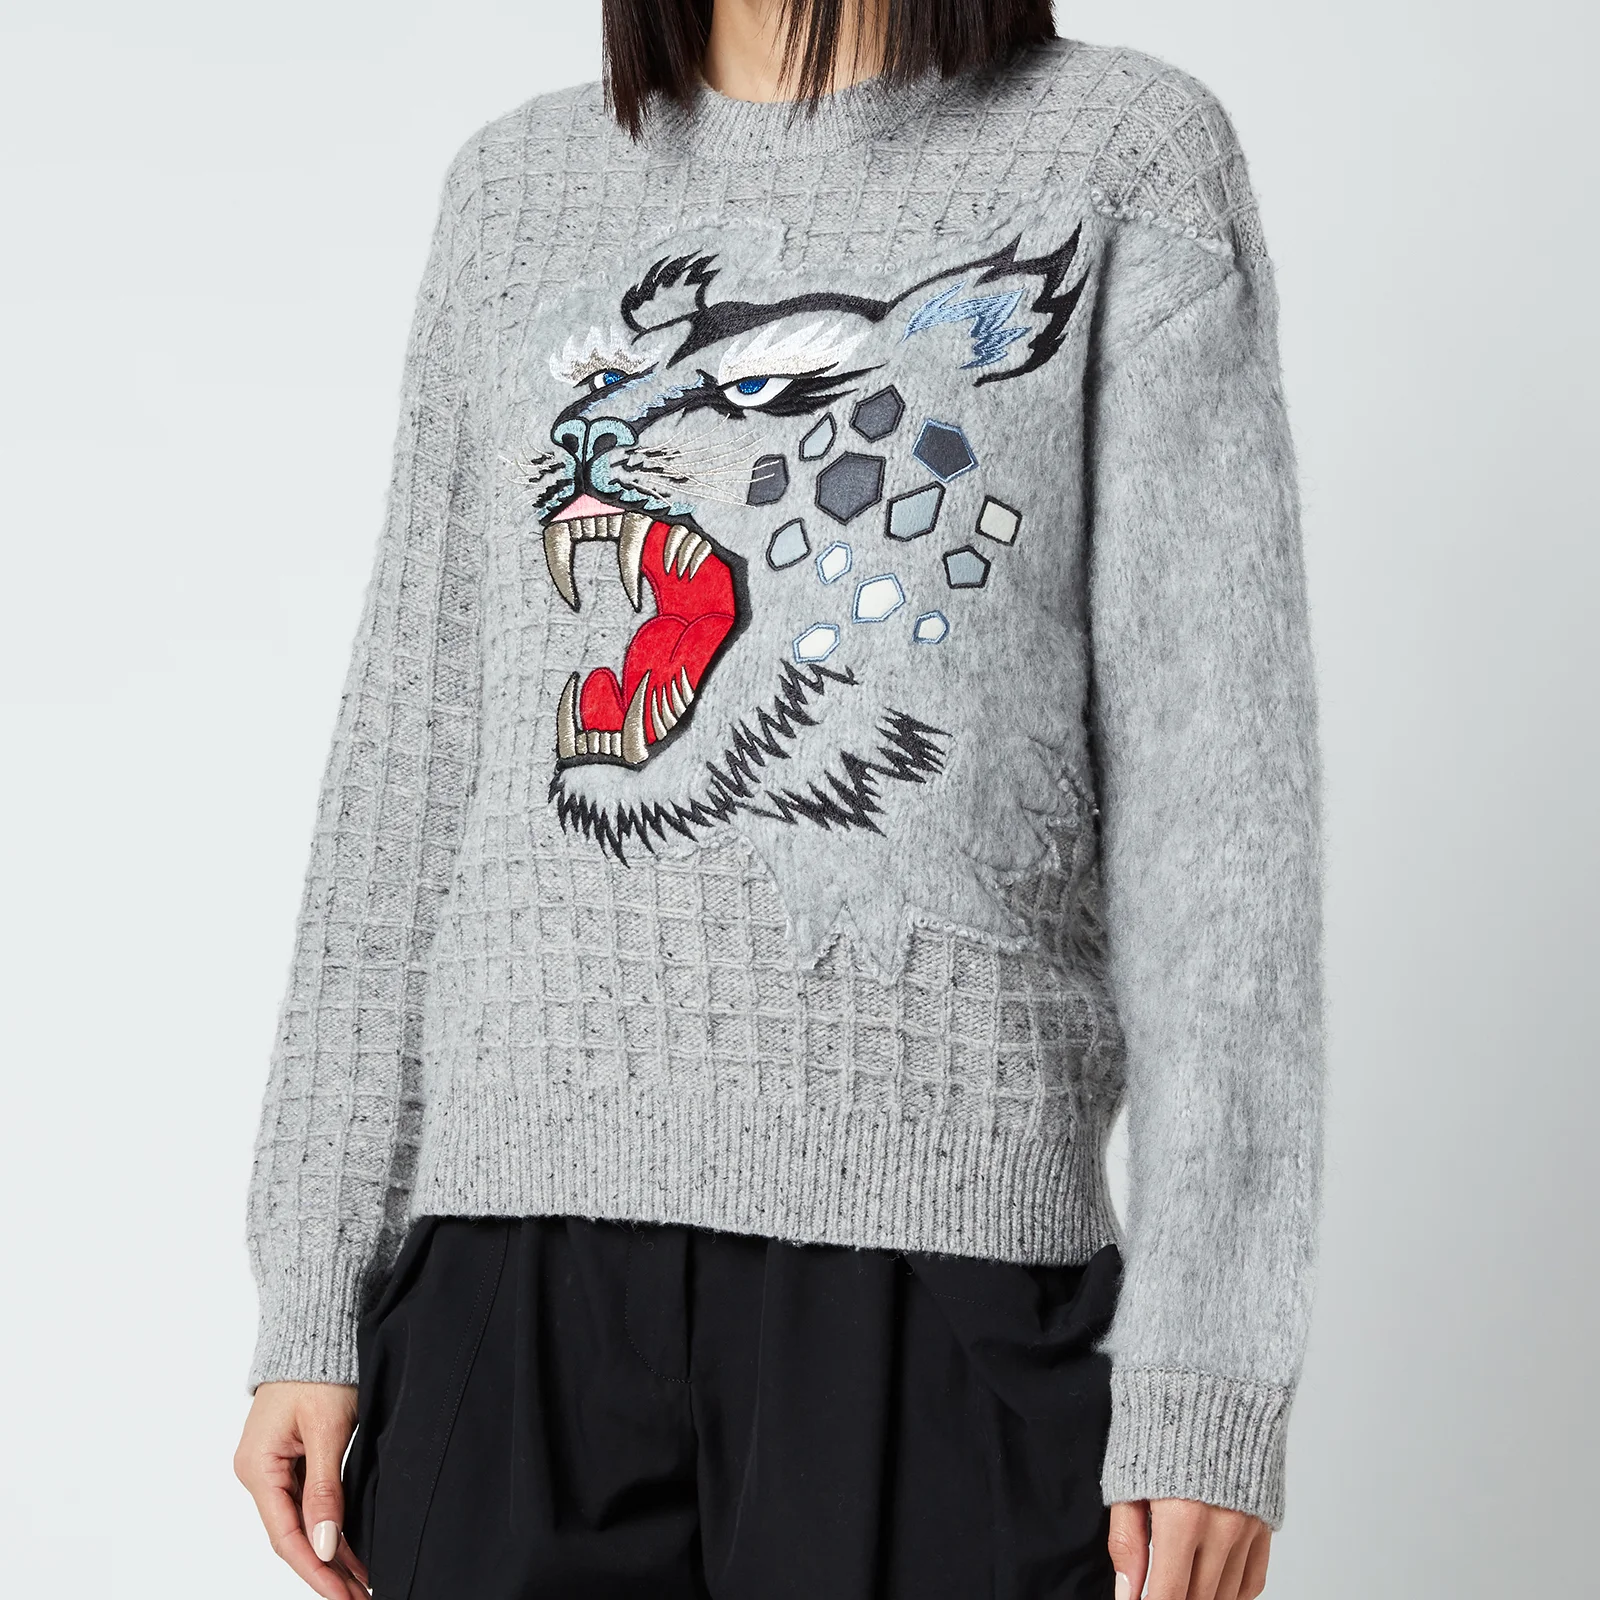 KENZO Women's Embroidered Jumper - Dove Grey Image 1